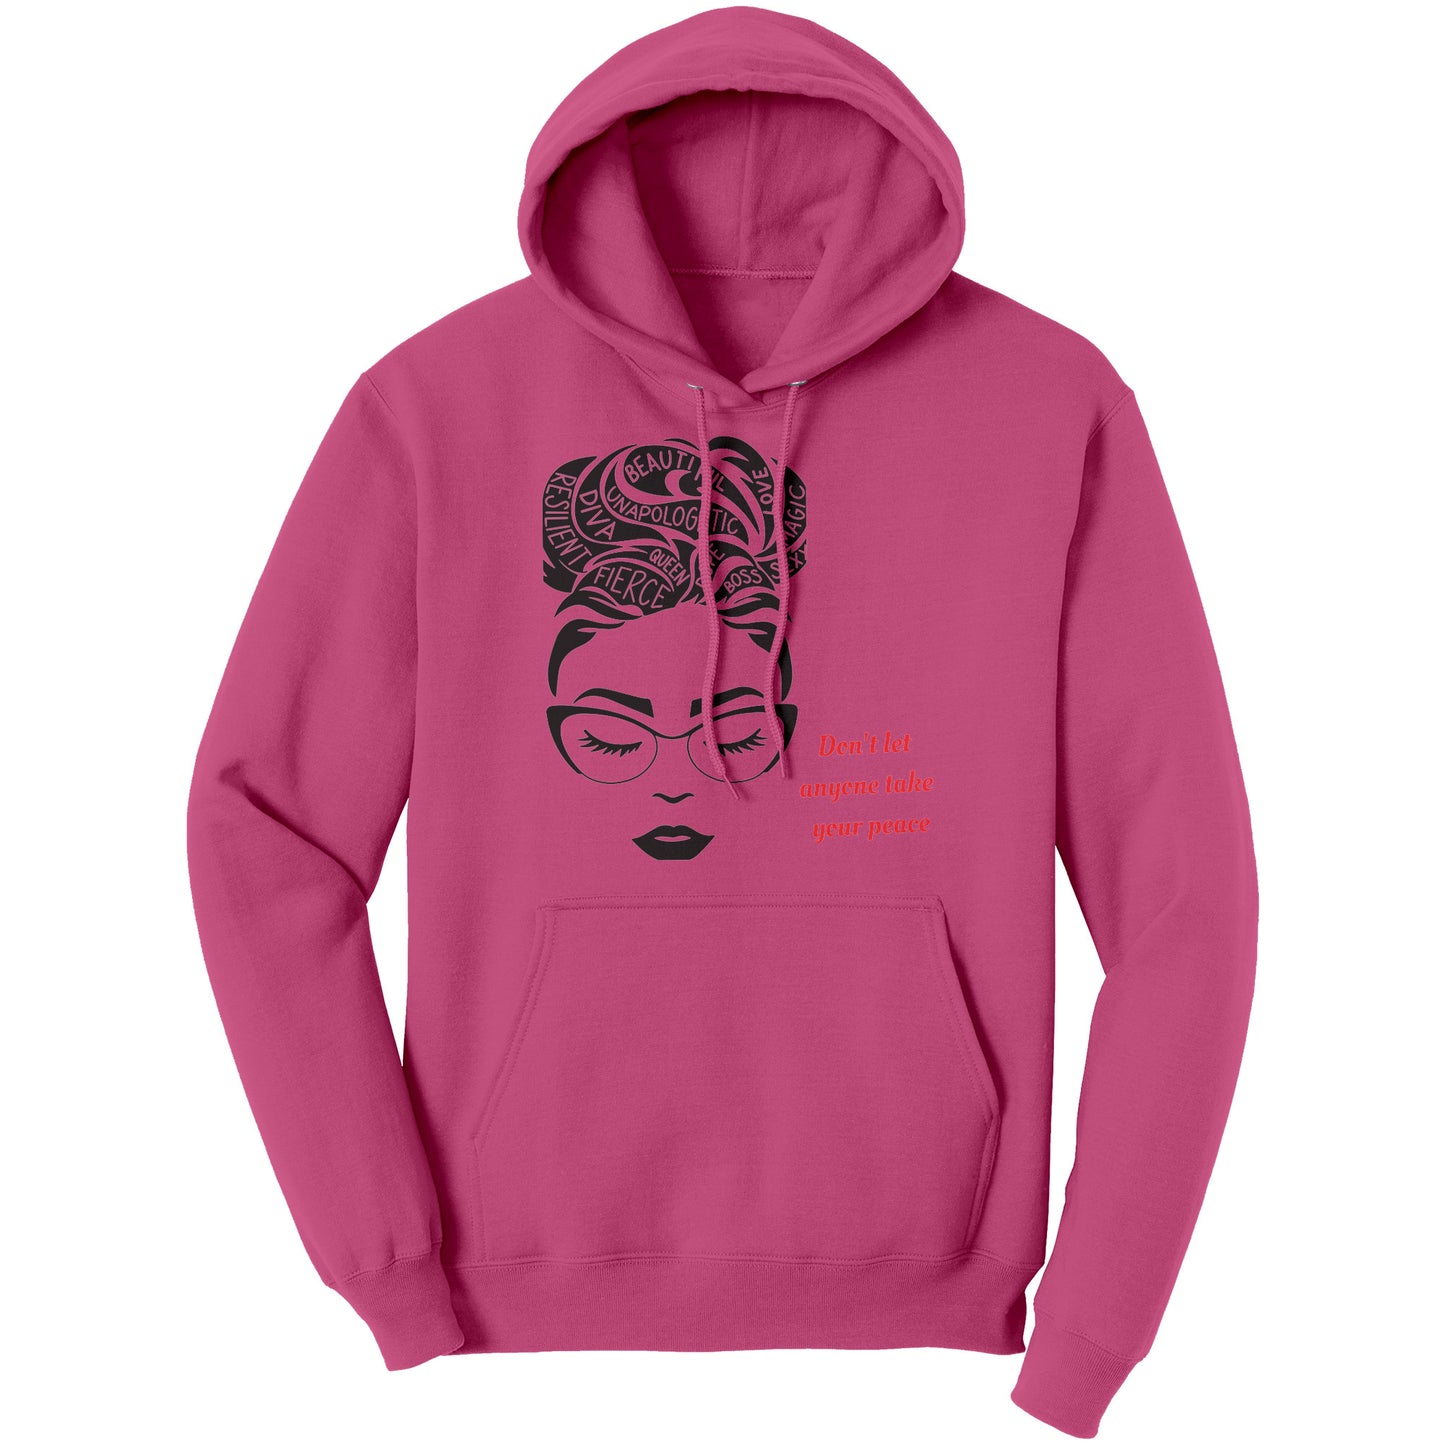 Don't let anyone take my peace hoodie (red lettering)